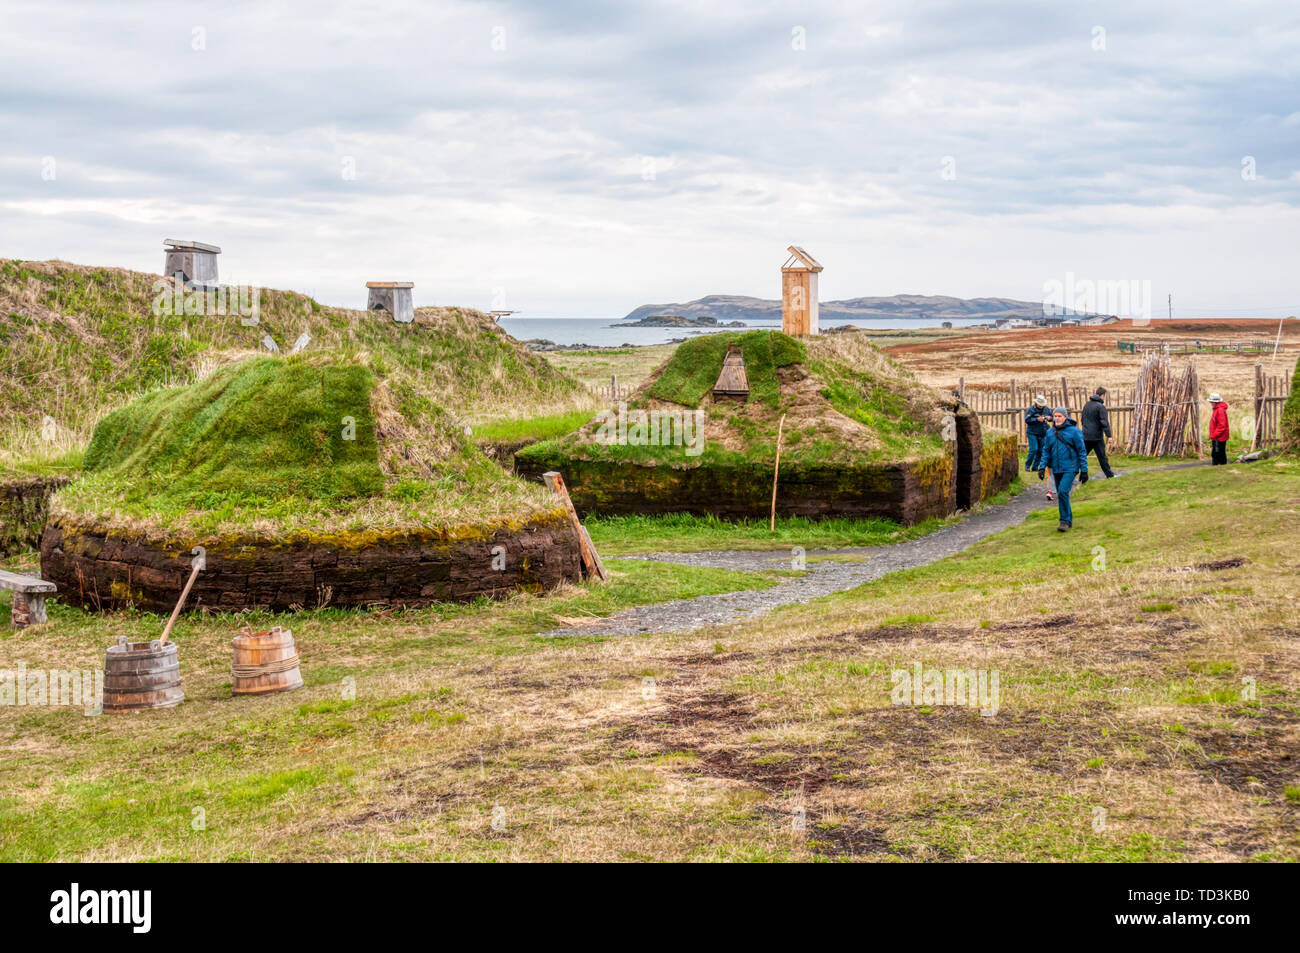 Tourists at the reconstructed Norse or Viking settlement at L’Anse aux Meadows on the Great Northern Peninsula of Newfoundland. Stock Photo